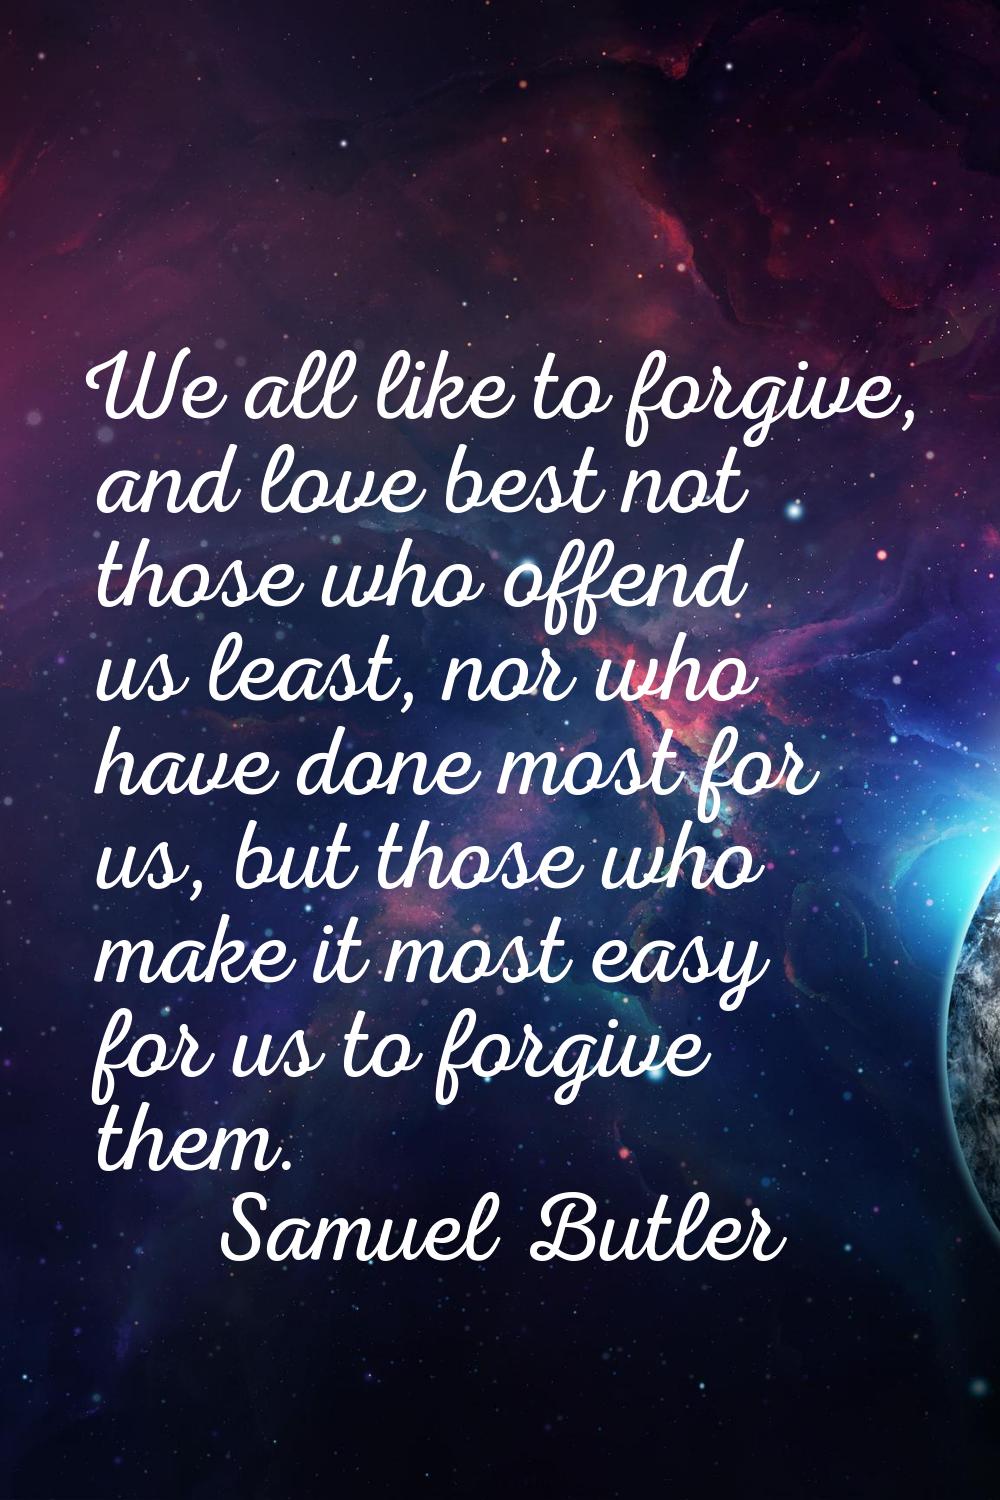 We all like to forgive, and love best not those who offend us least, nor who have done most for us,